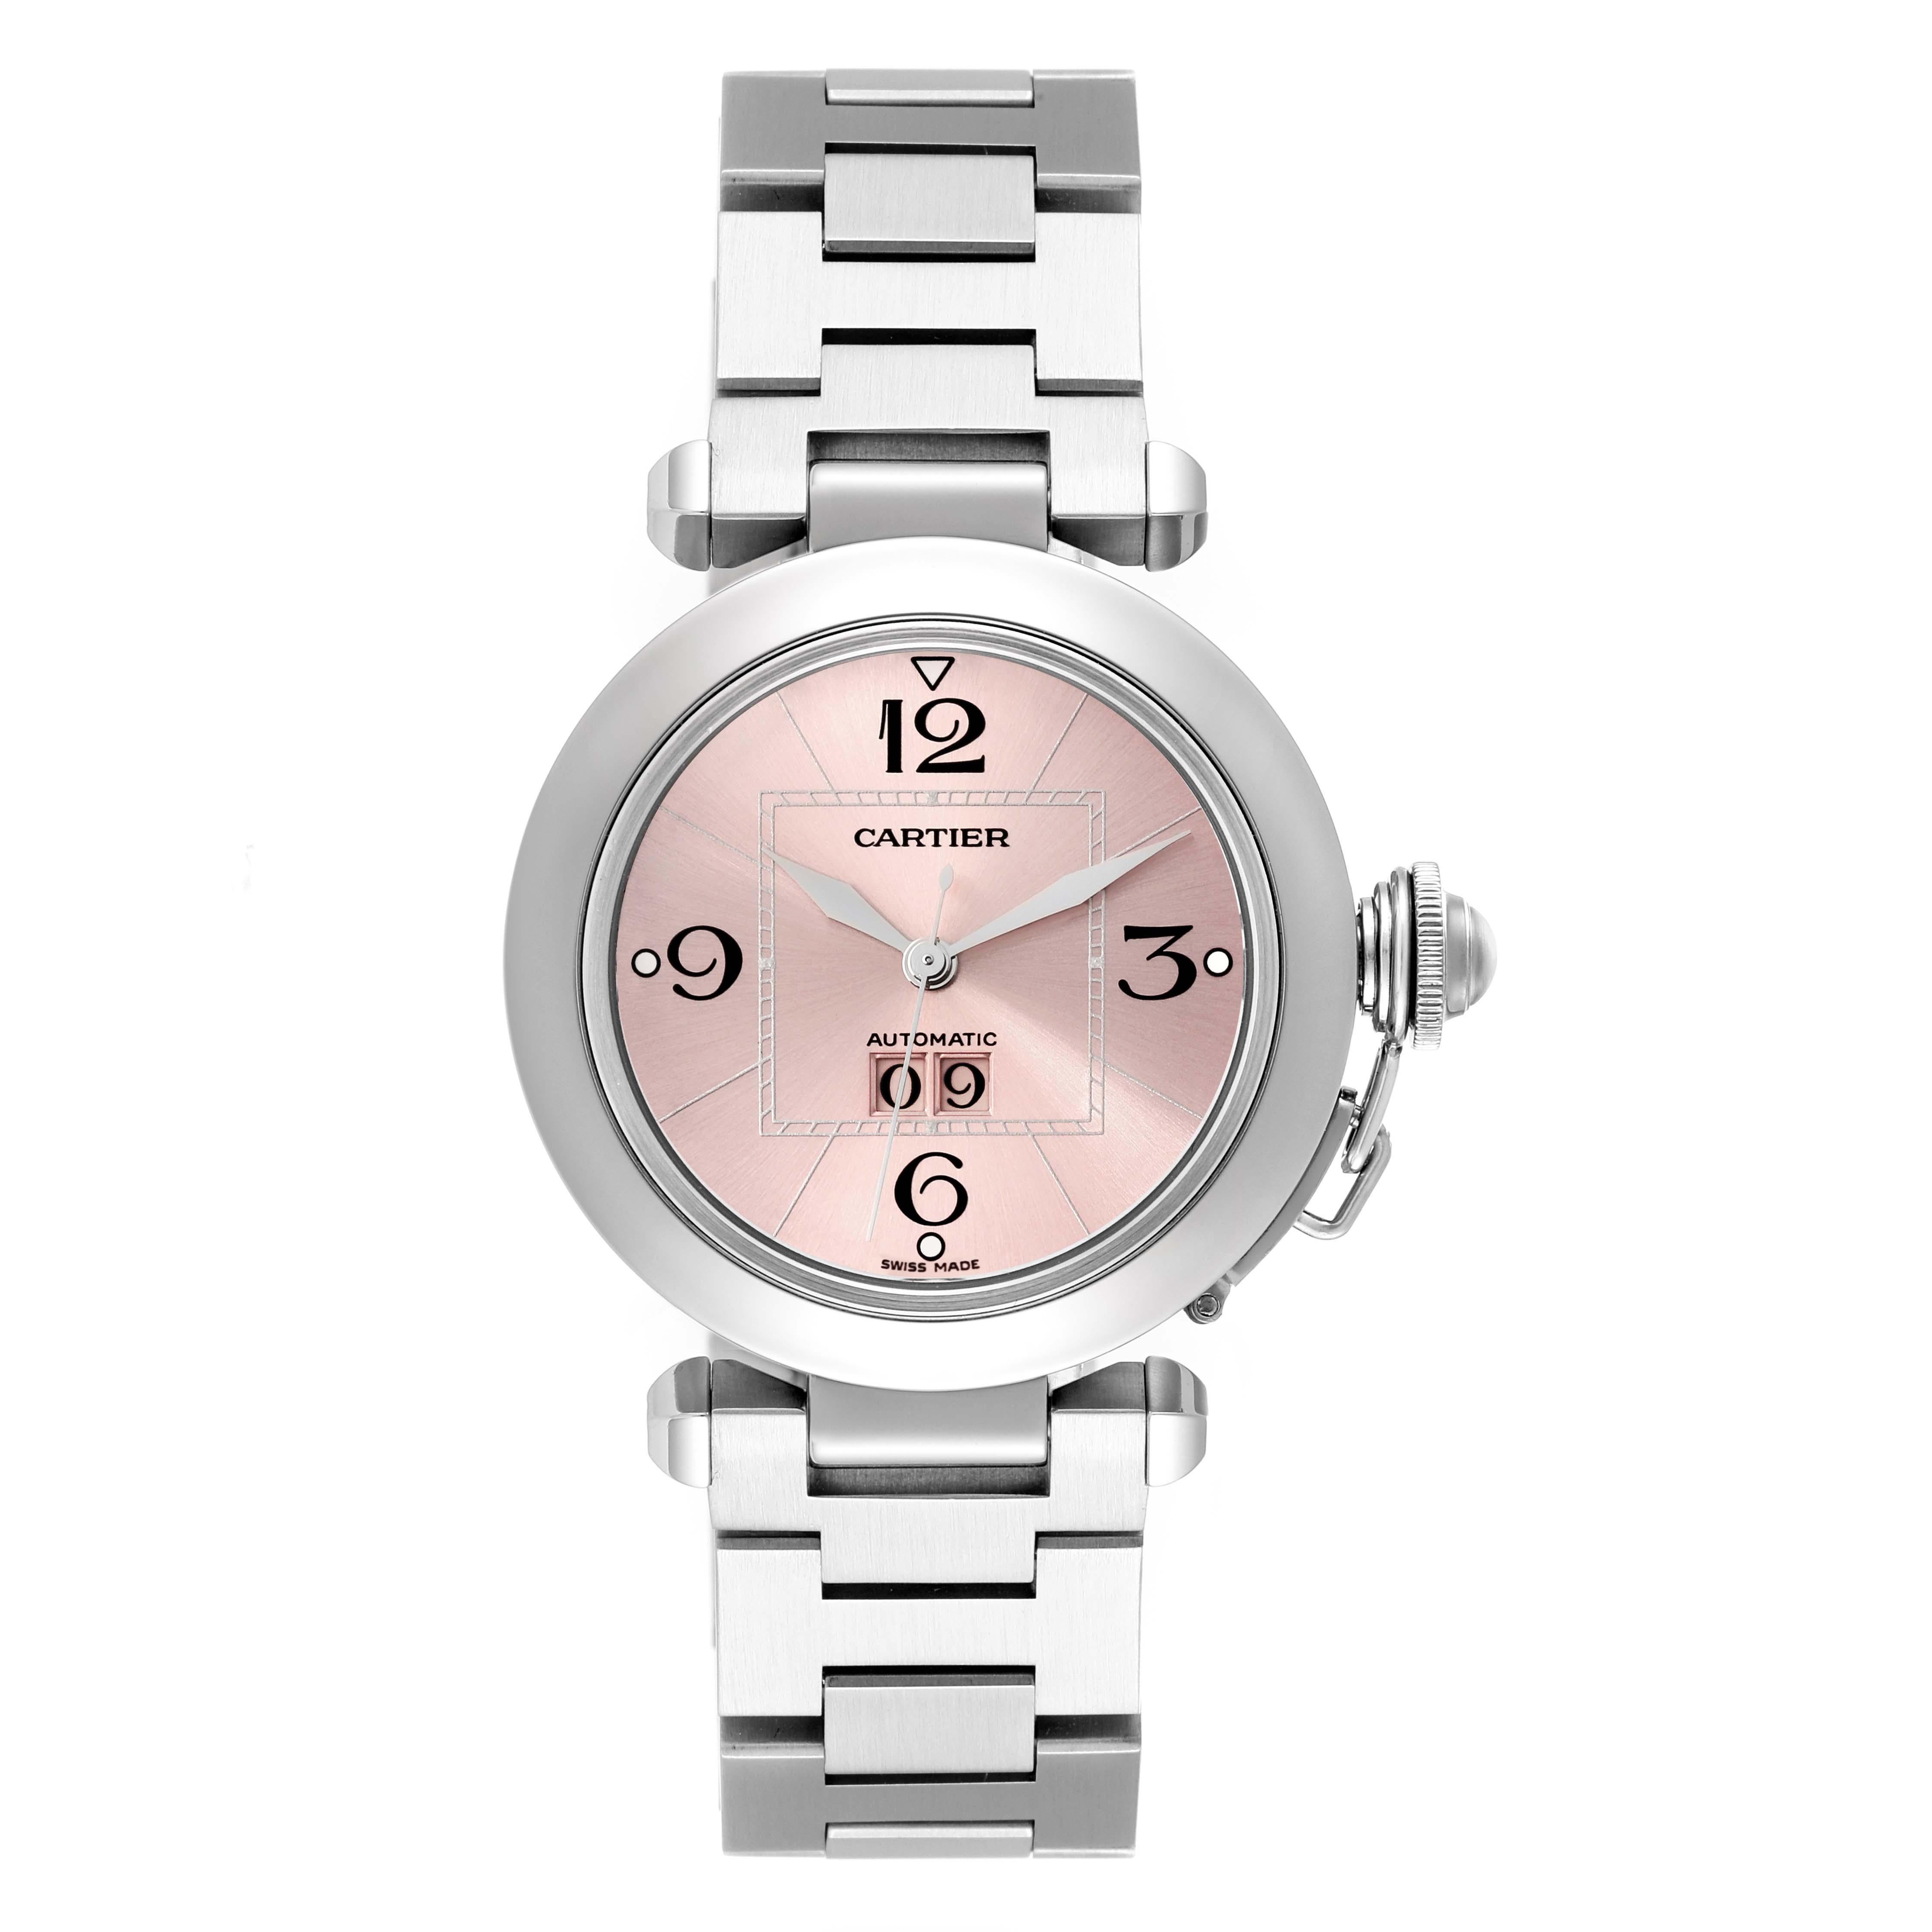 Cartier Pasha Big Date Pink Dial Steel Ladies Watch W31058M7 Box Papers. Automatic self-winding movement. Round stainless steel case 35.0 mm in diameter. Case back with 8 screws. Vendome lugs. Winding-crown protection cap. Stainless steel concave